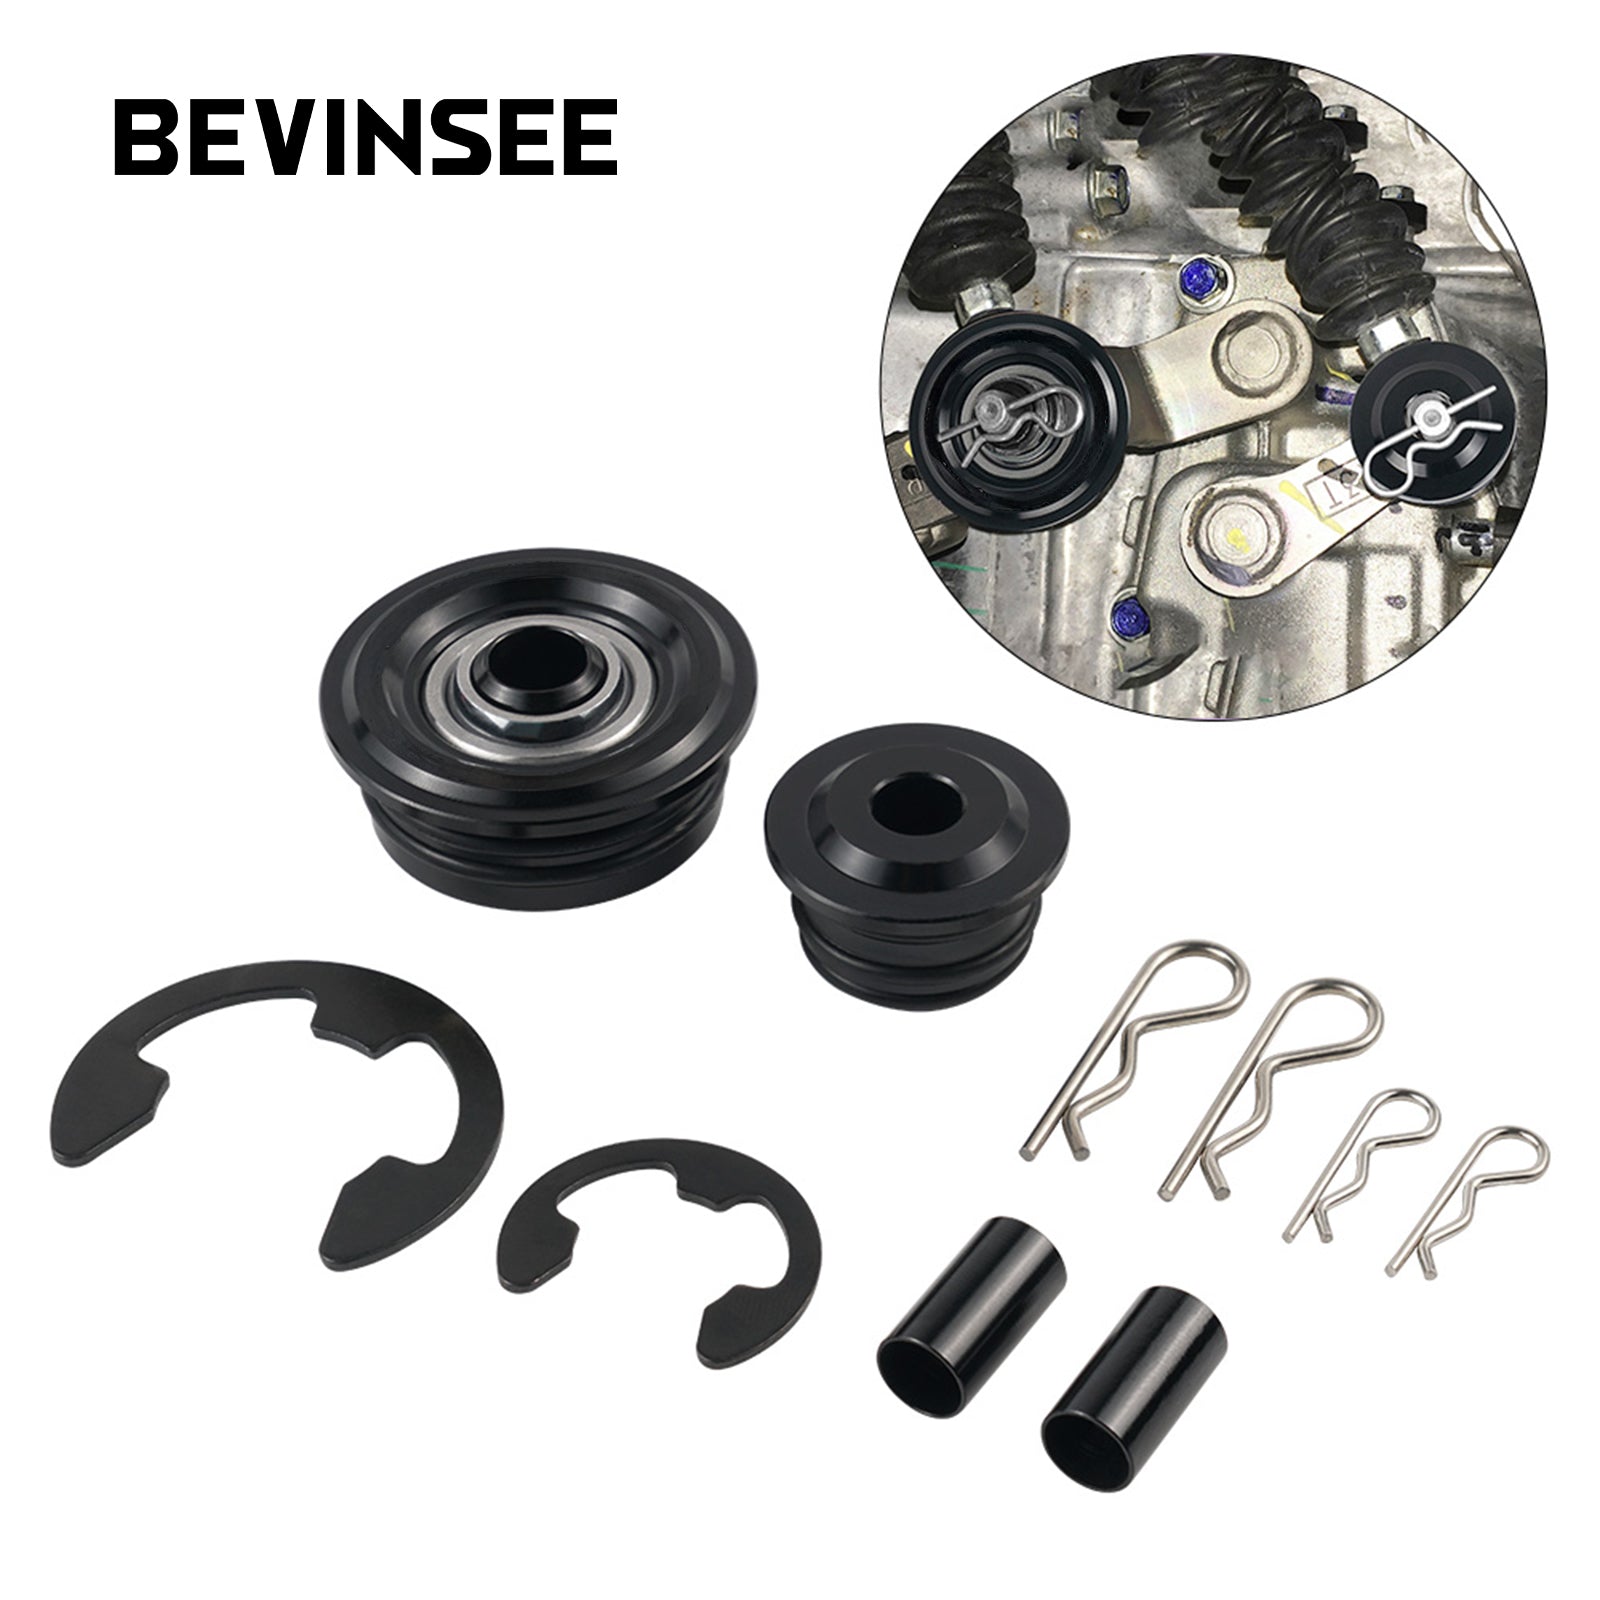 BEVINSEE Spherical Shifter Linkage Cable Bushings Upgrade for Honda Accord, Civic SI , Acura RSX, TSX